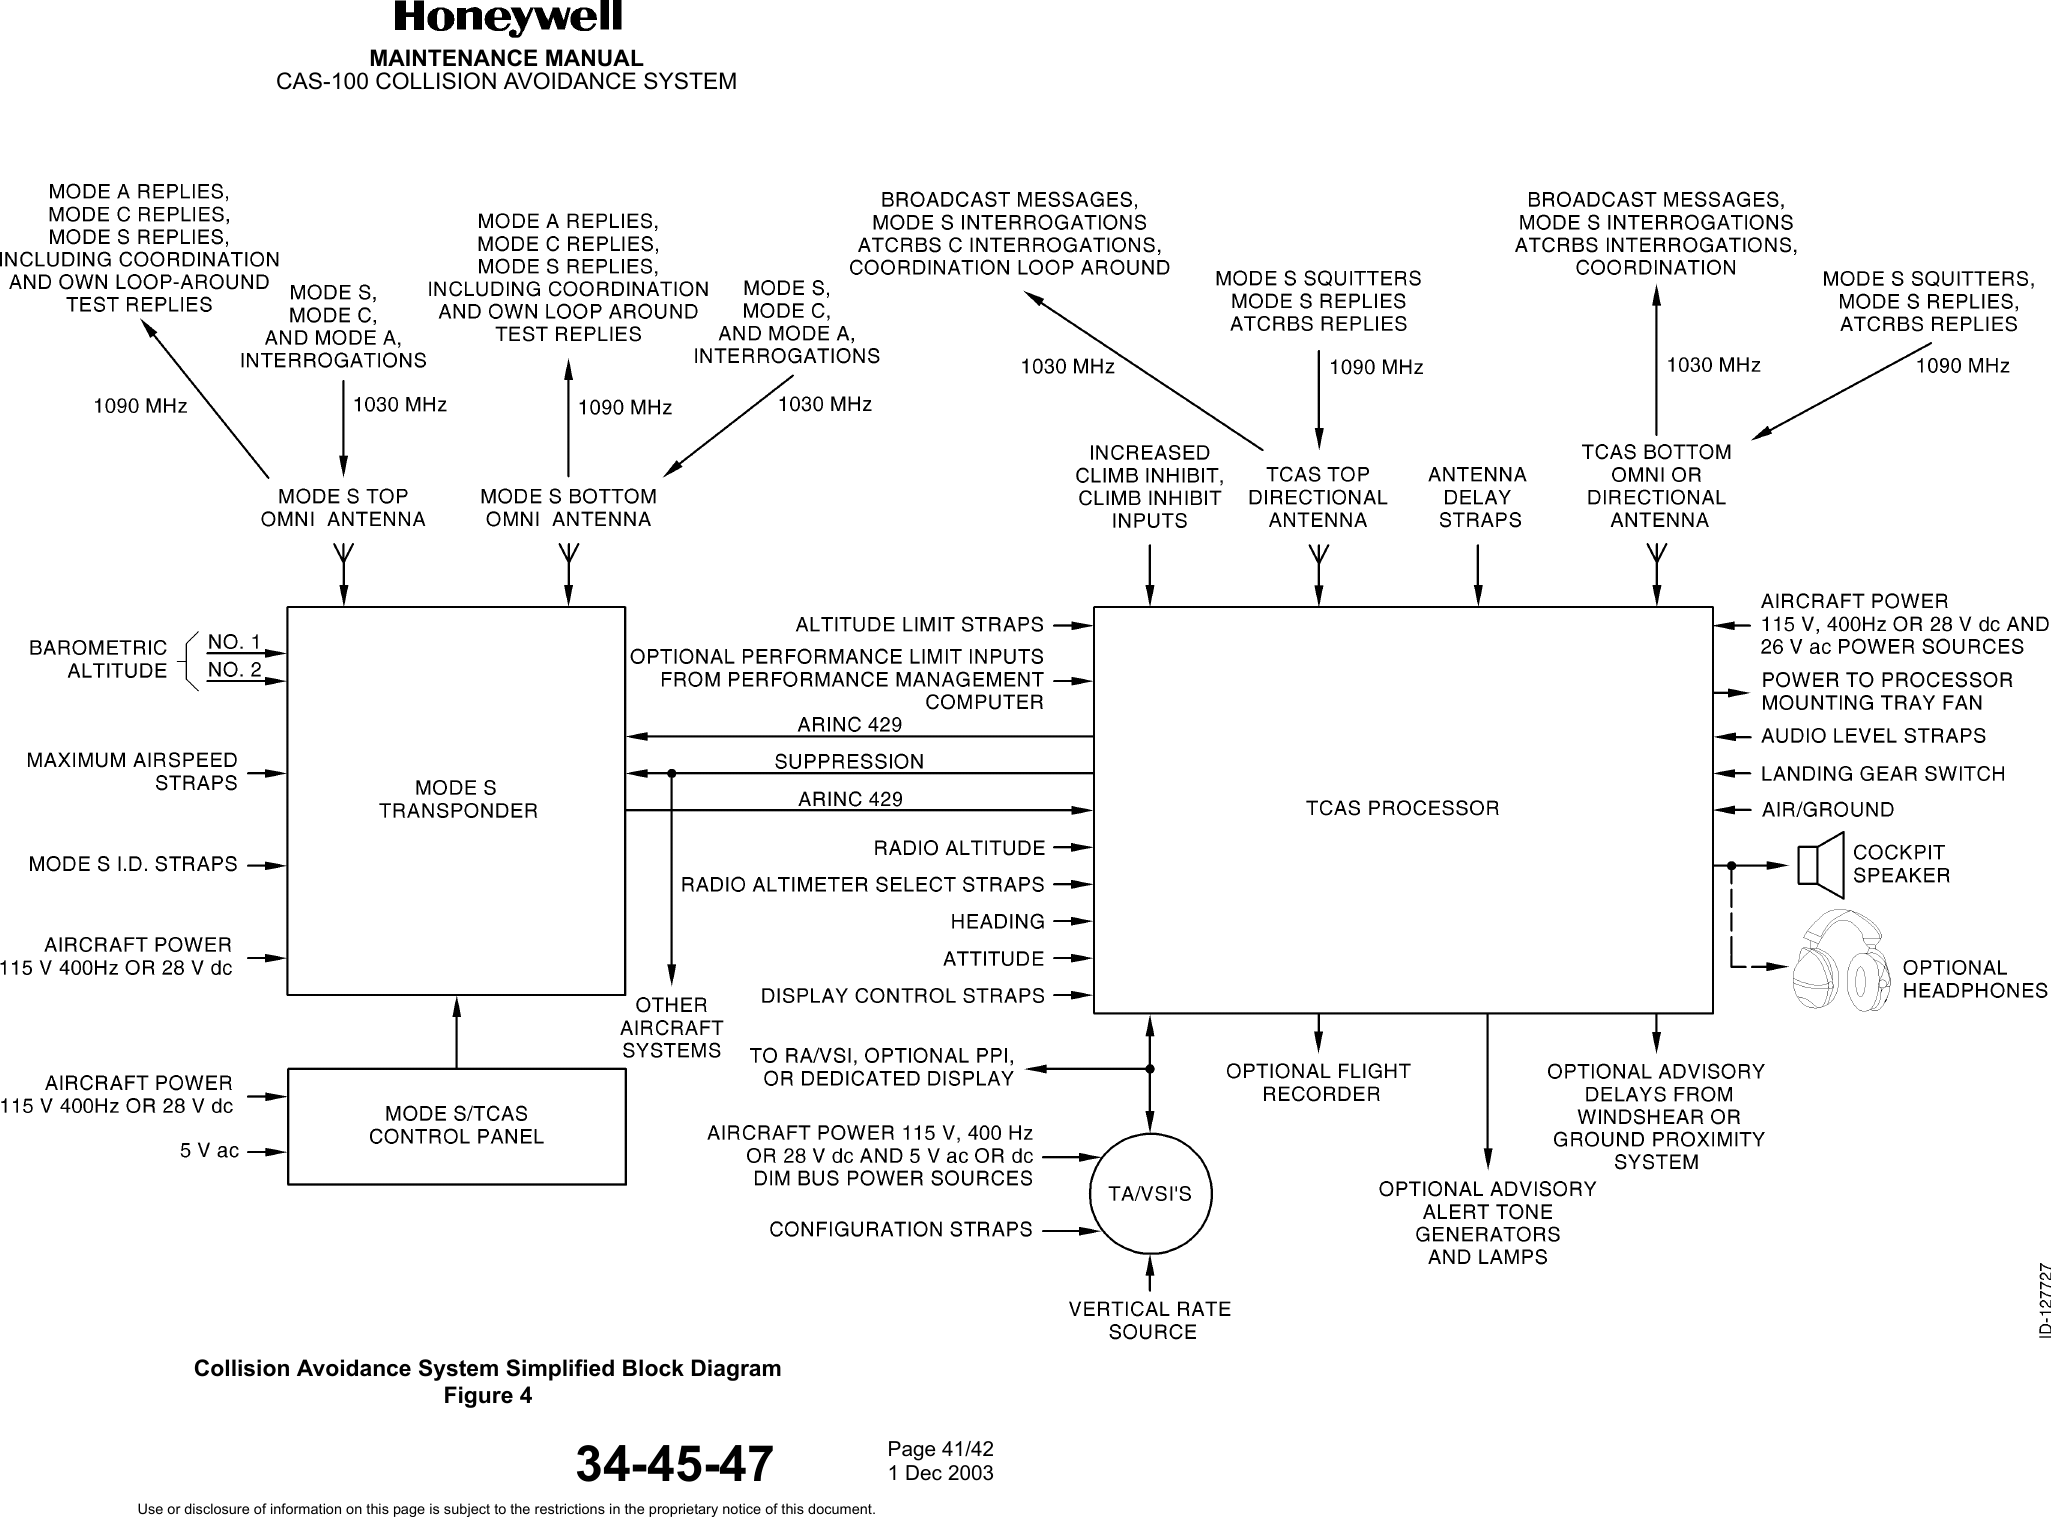 MAINTENANCE MANUALCAS-100 COLLISION AVOIDANCE SYSTEM1 Dec 200334-45-47Collision Avoidance System Simplified Block DiagramFigure 4Page 41/42Use or disclosure of information on this page is subject to the restrictions in the proprietary notice of this document.